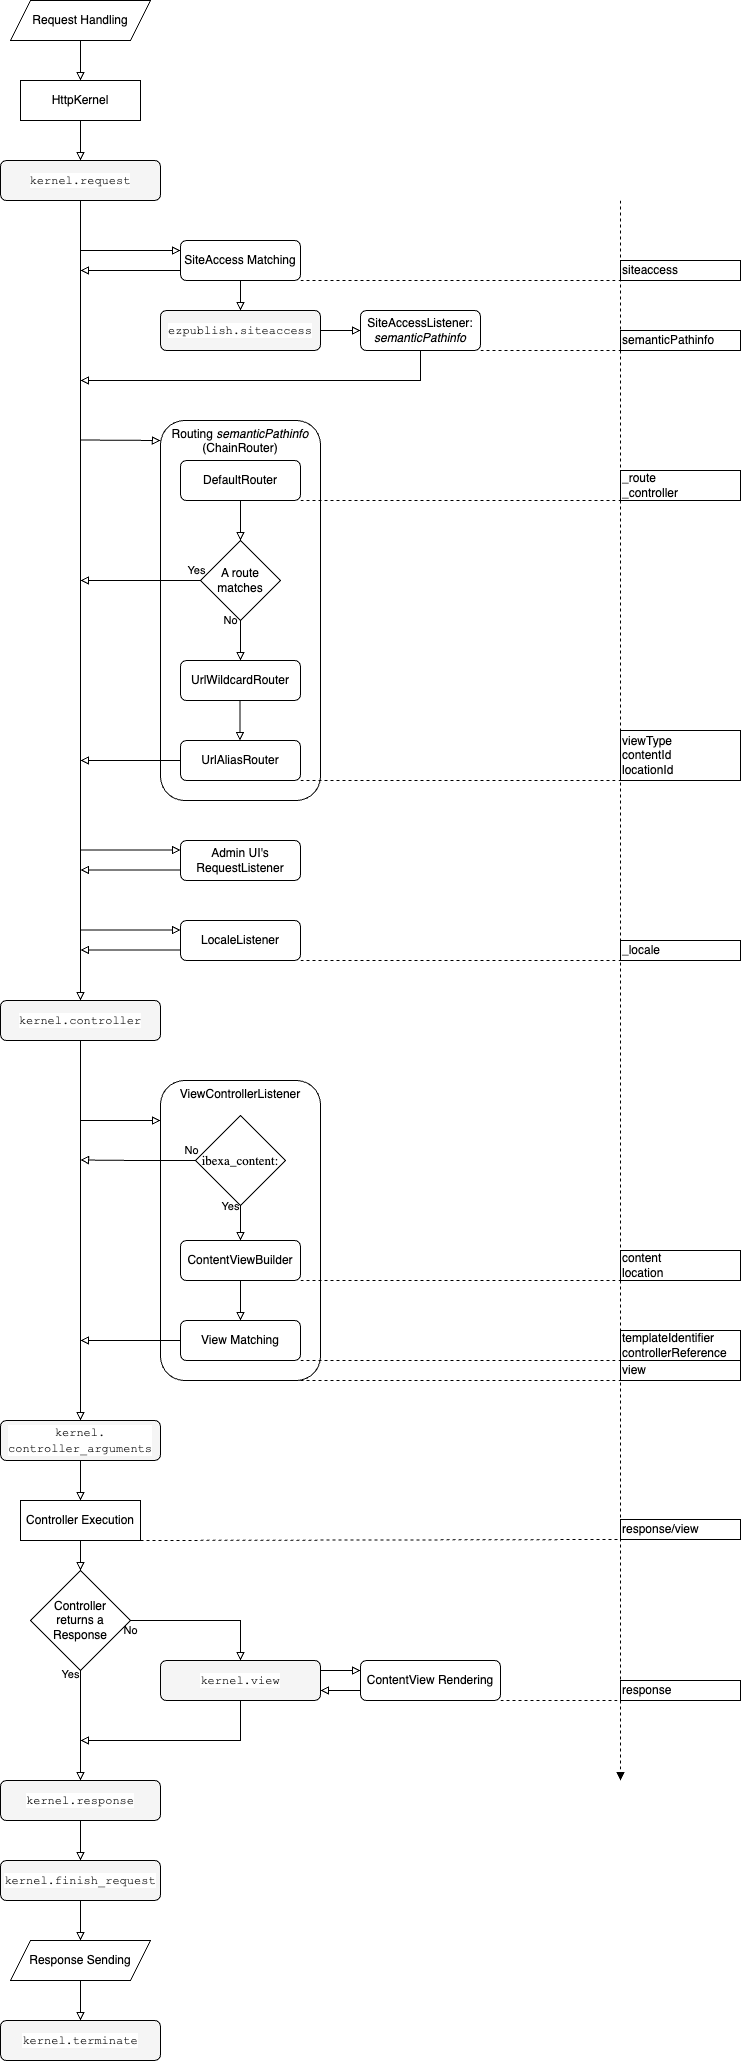 Detailed request lifecycle flowchart organised around kernel events